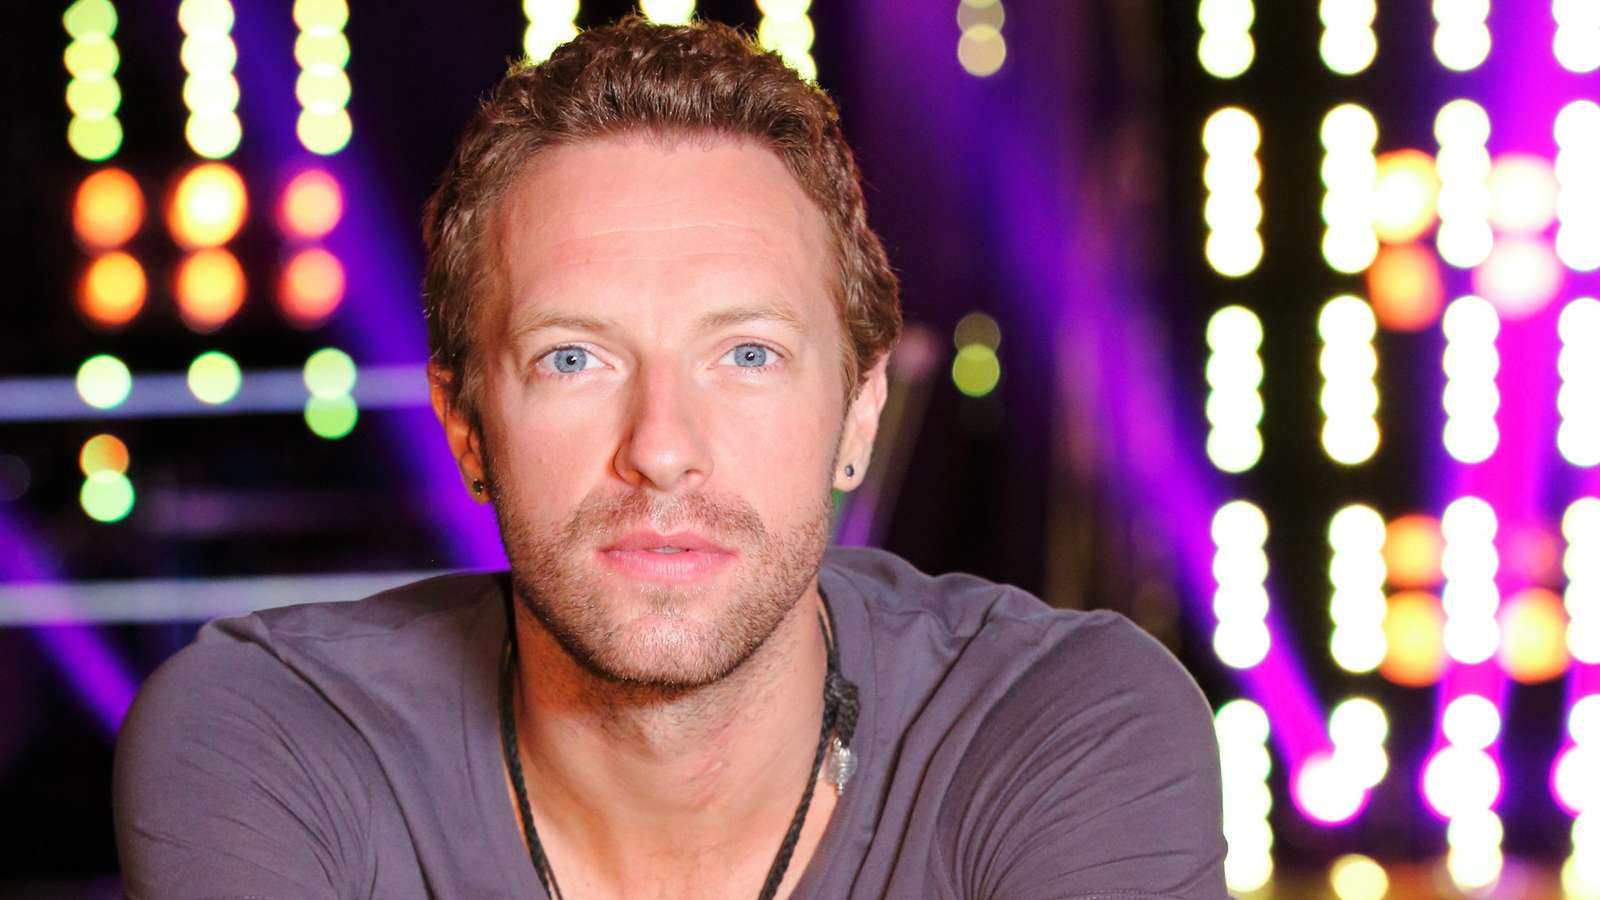 chris martin puzzle online from photo